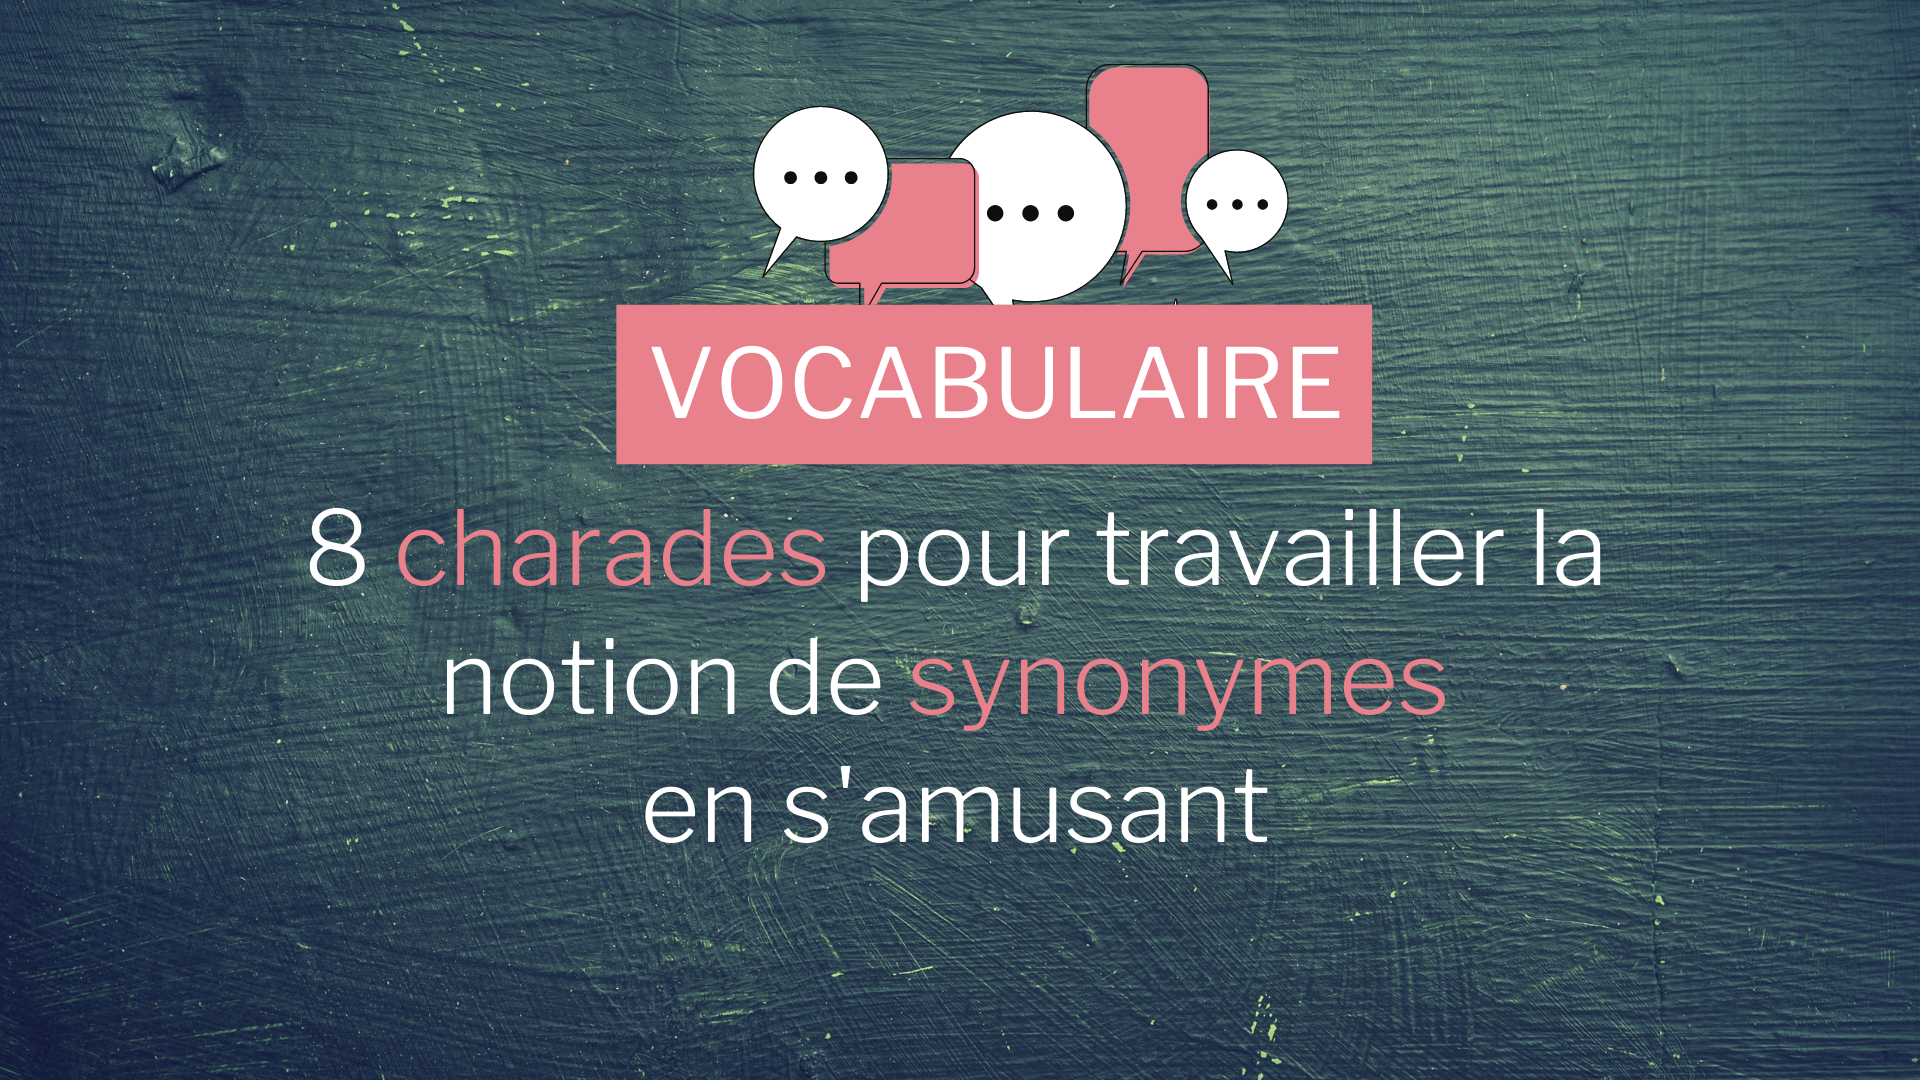 charades vocabulaire synonymes